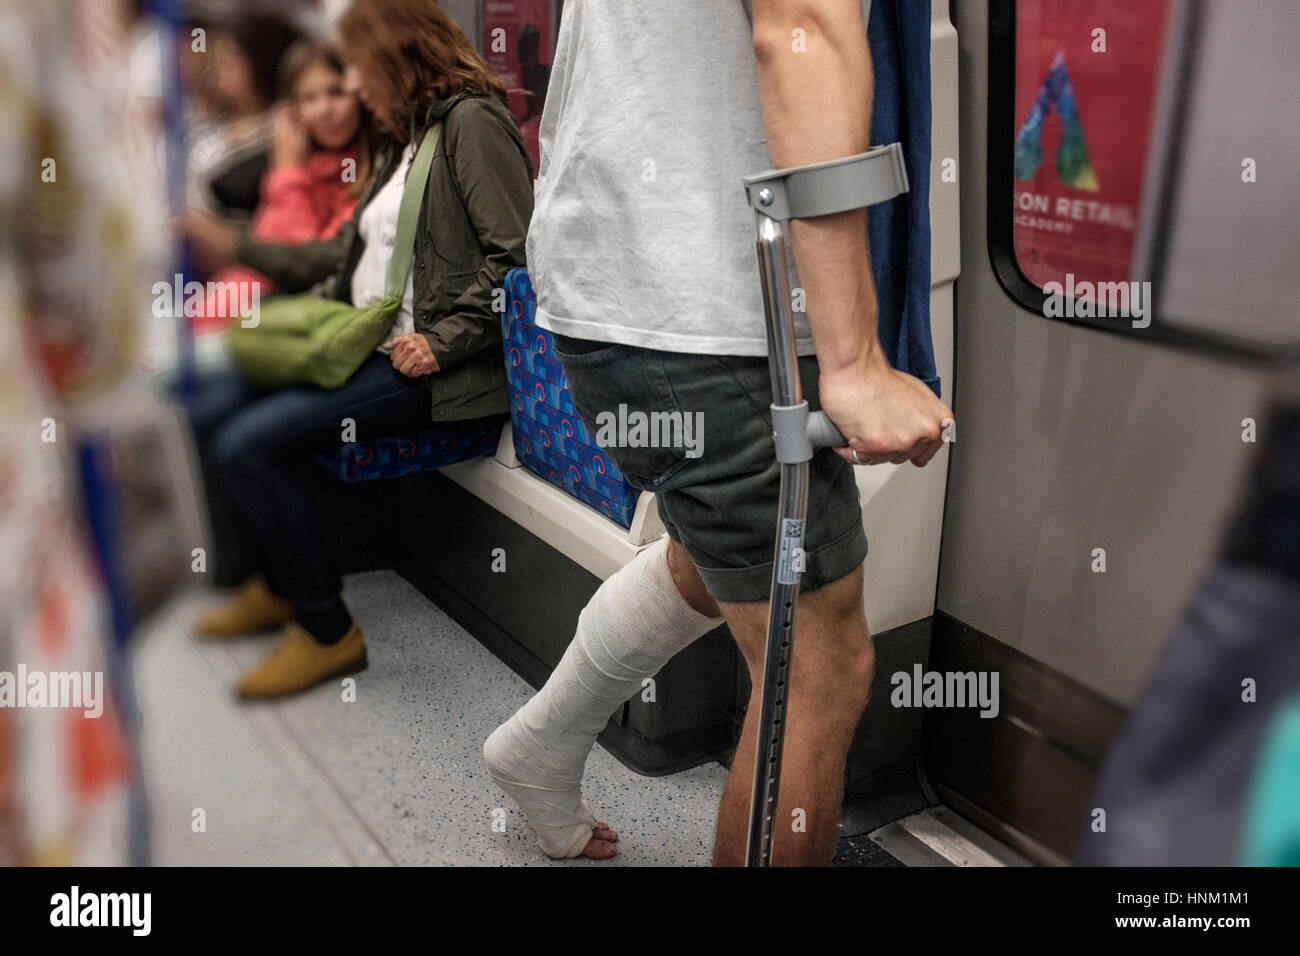 Man on crutches  with plaster cast on public transport,London Underground,England Stock Photo